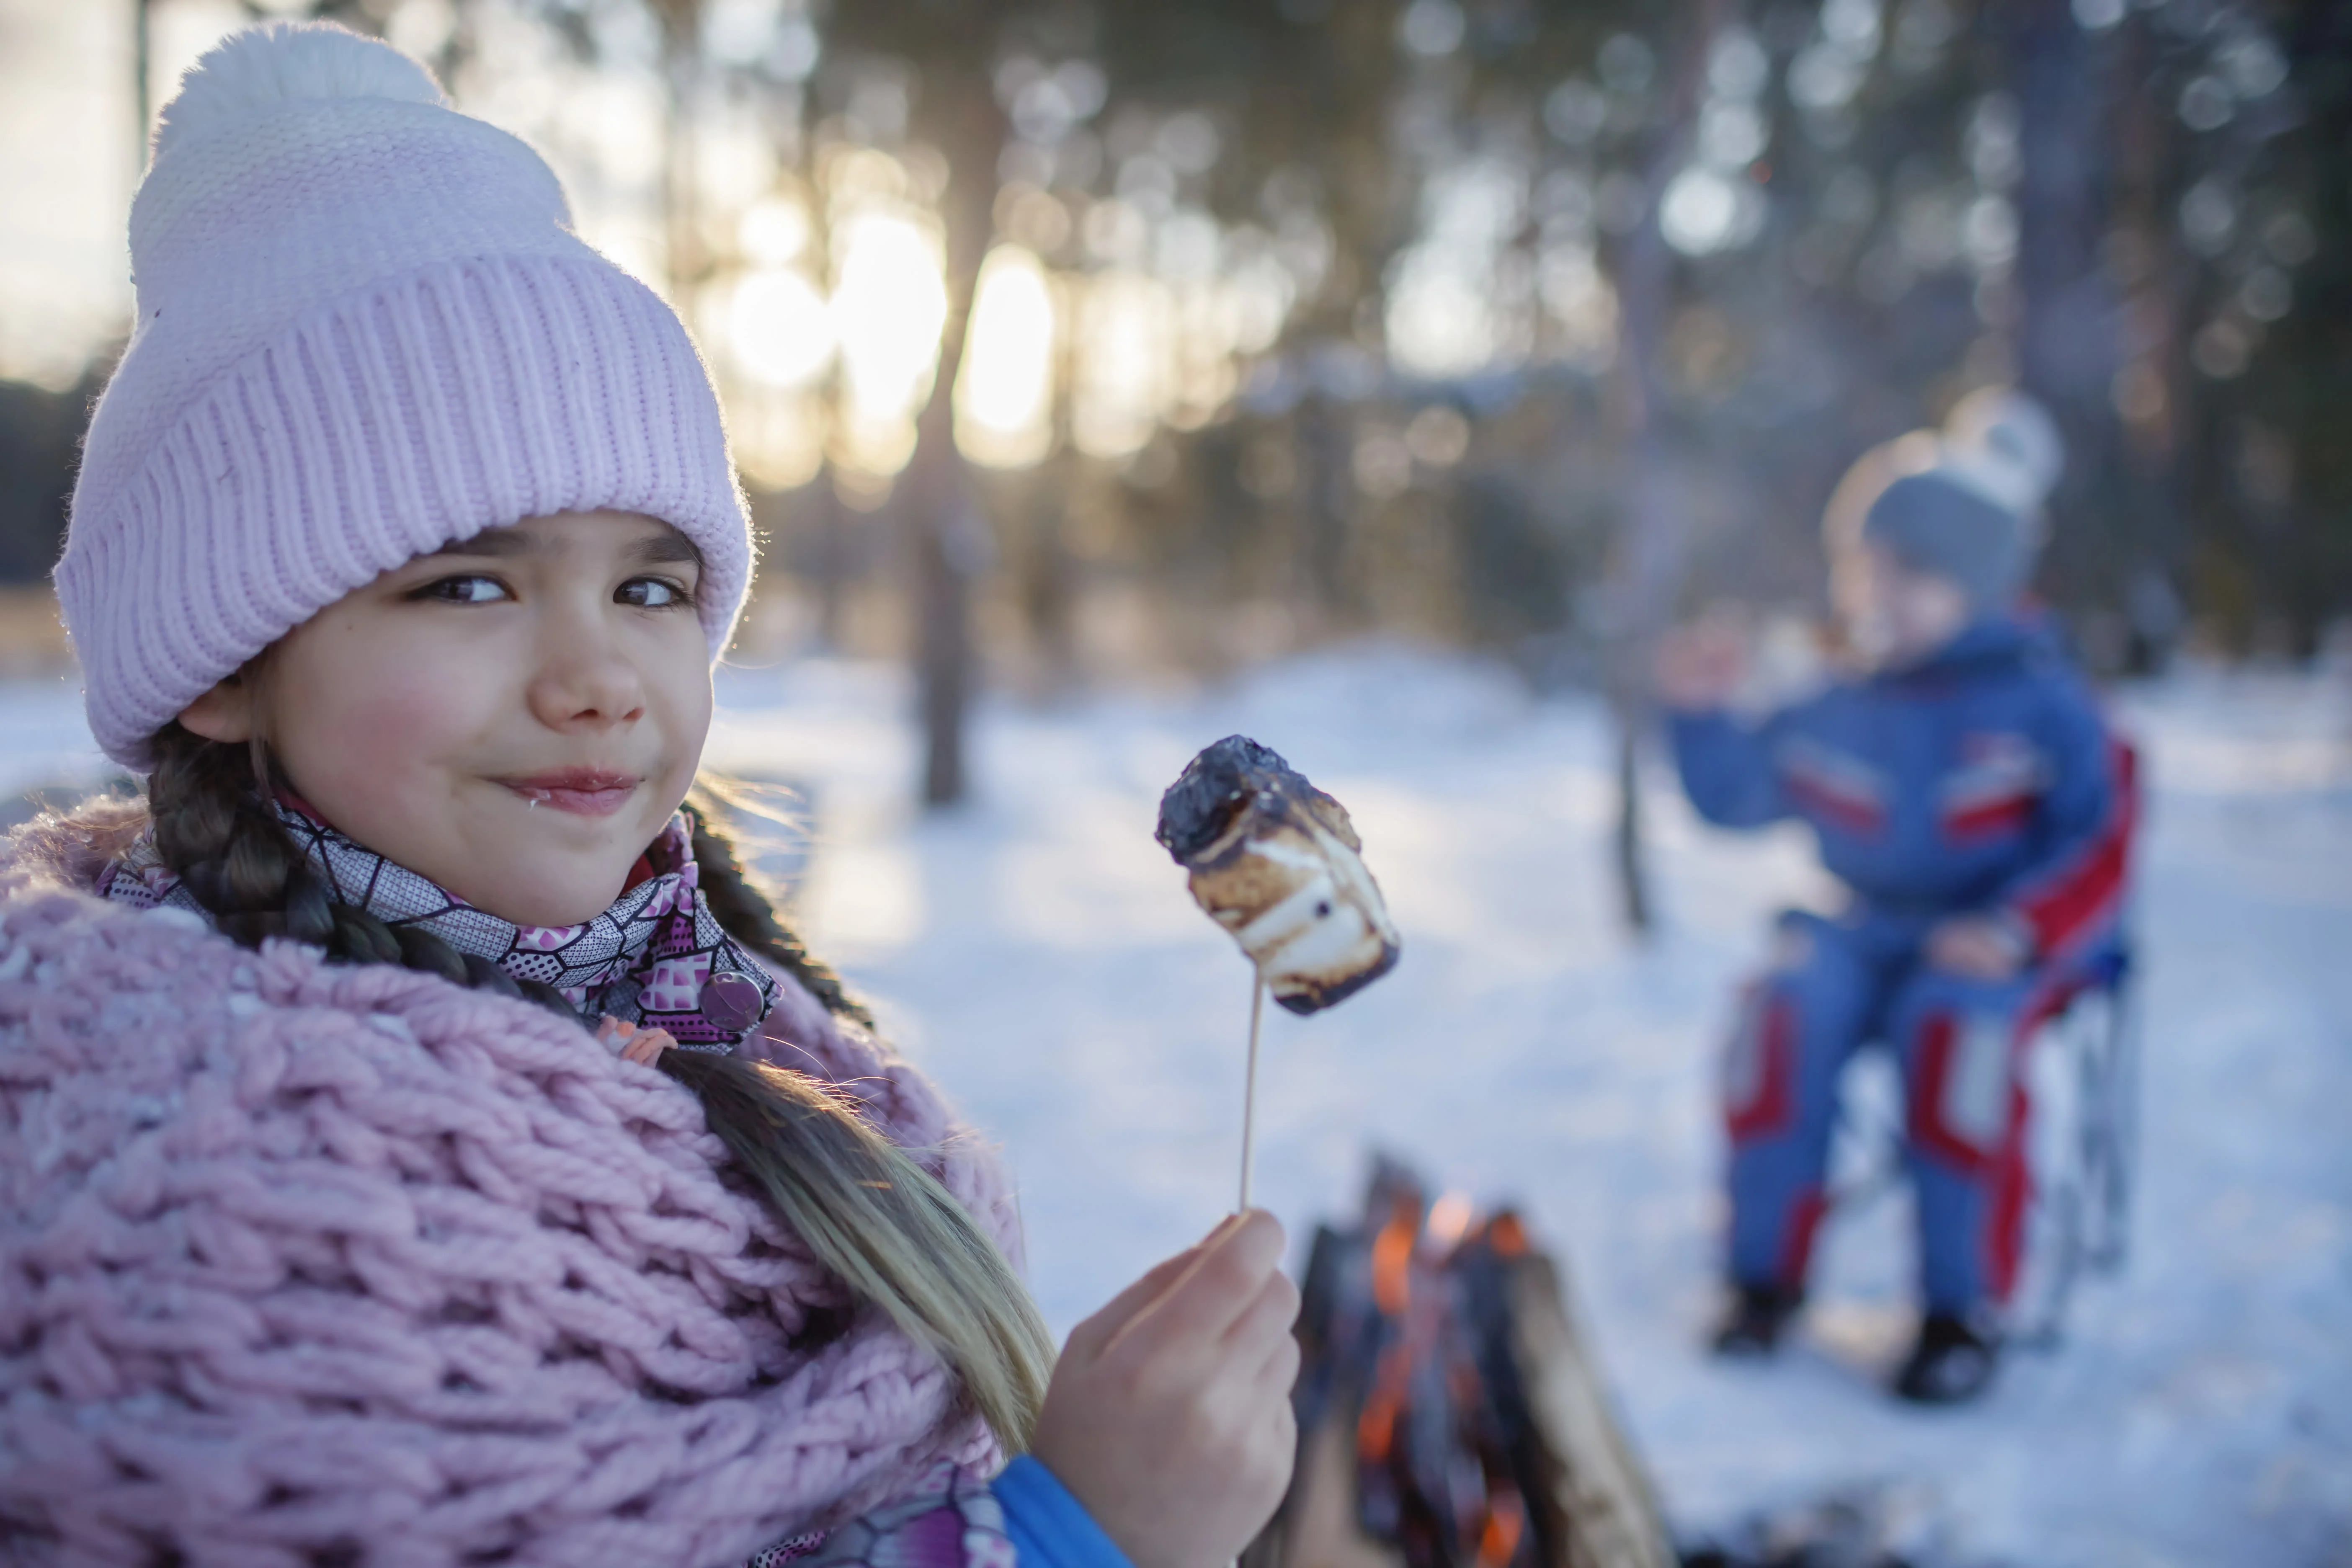 Young camper outside in winter clothing roasting a marshmellow with a fire and snow behind them